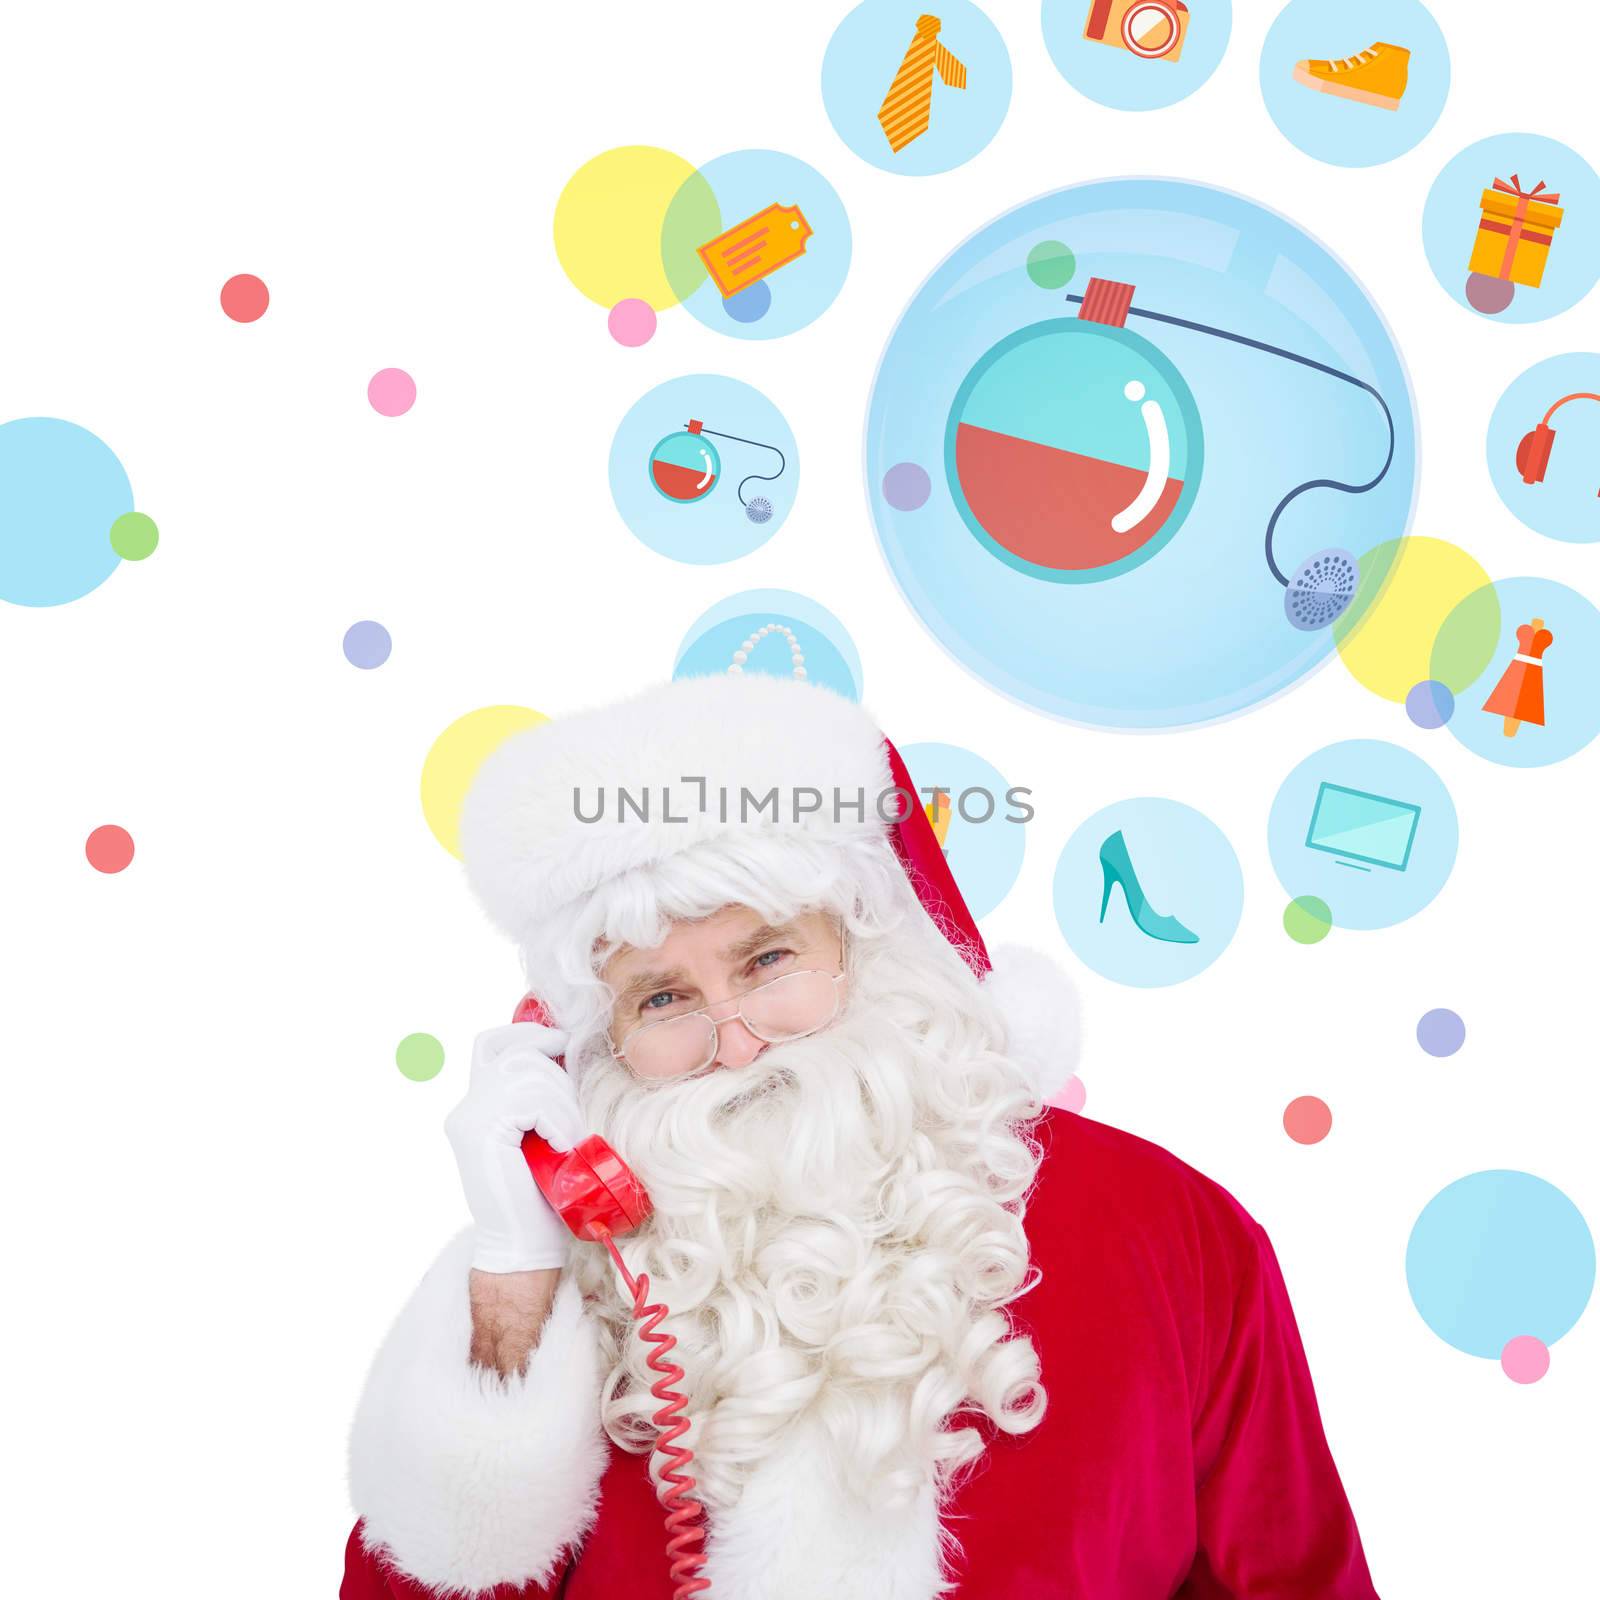 Santa claus on the phone  against dot pattern